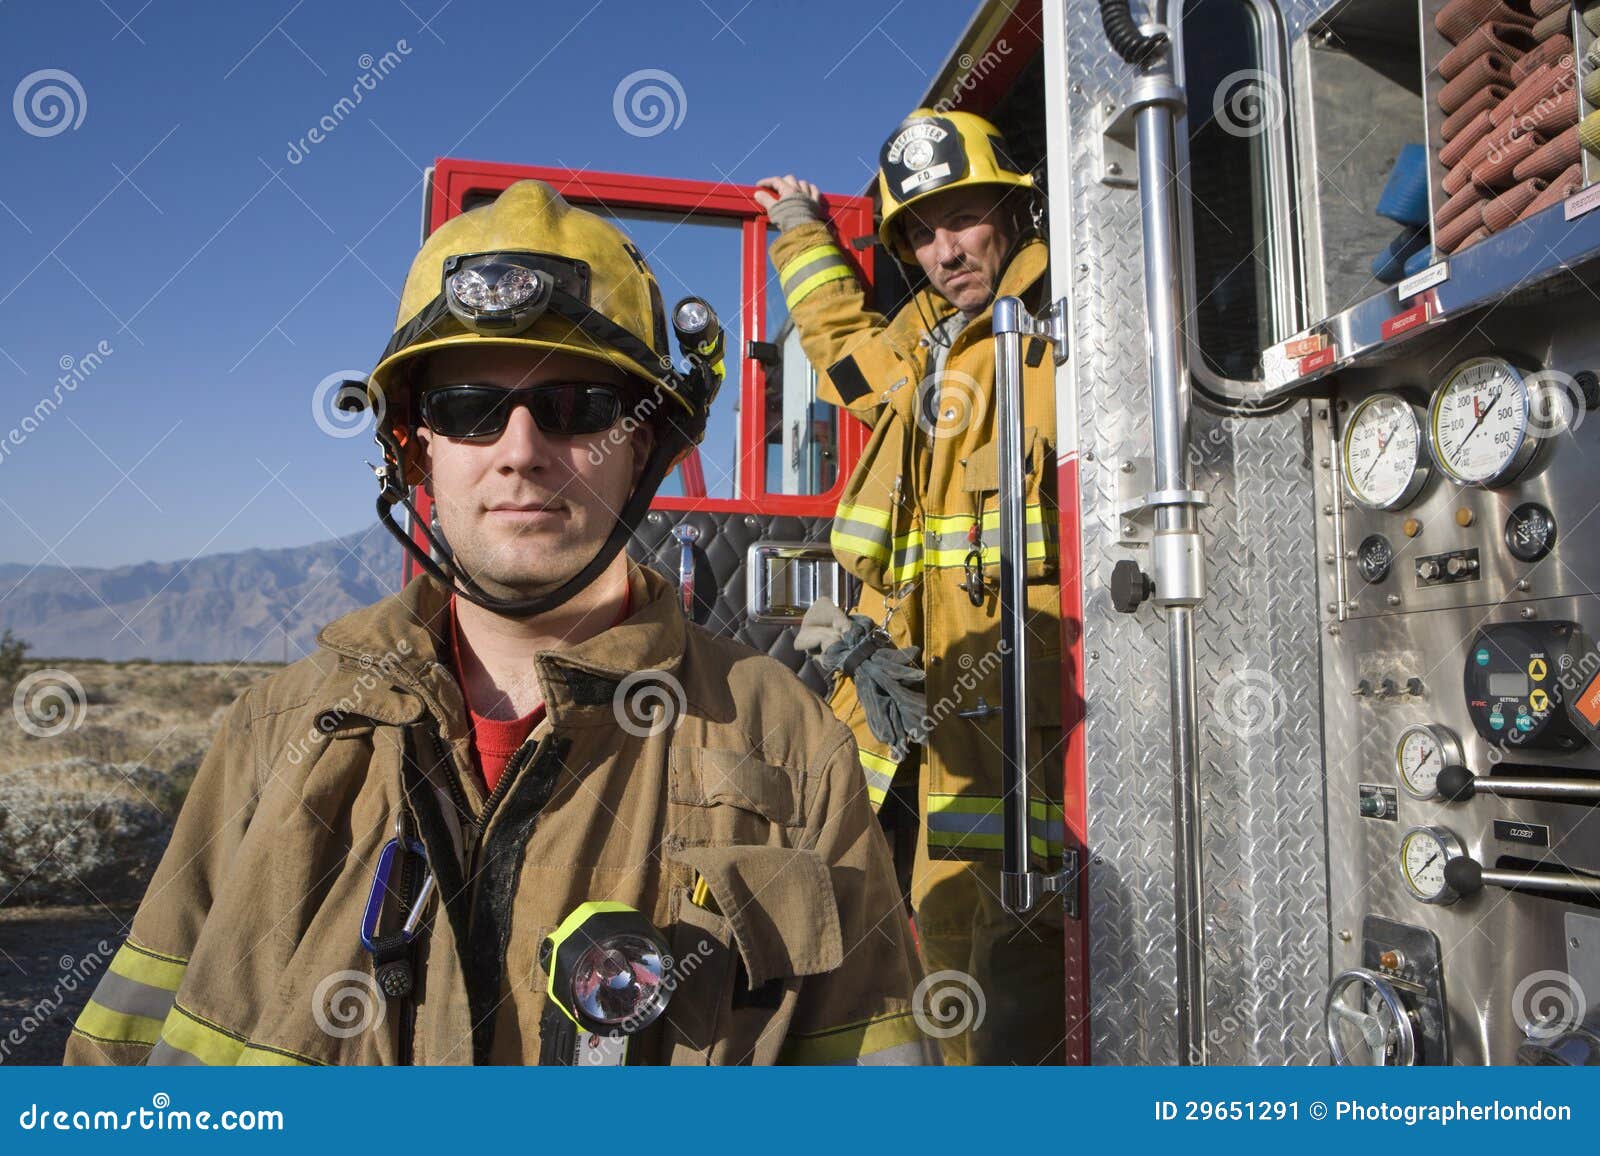 portrait of a fireman with coworker in the background